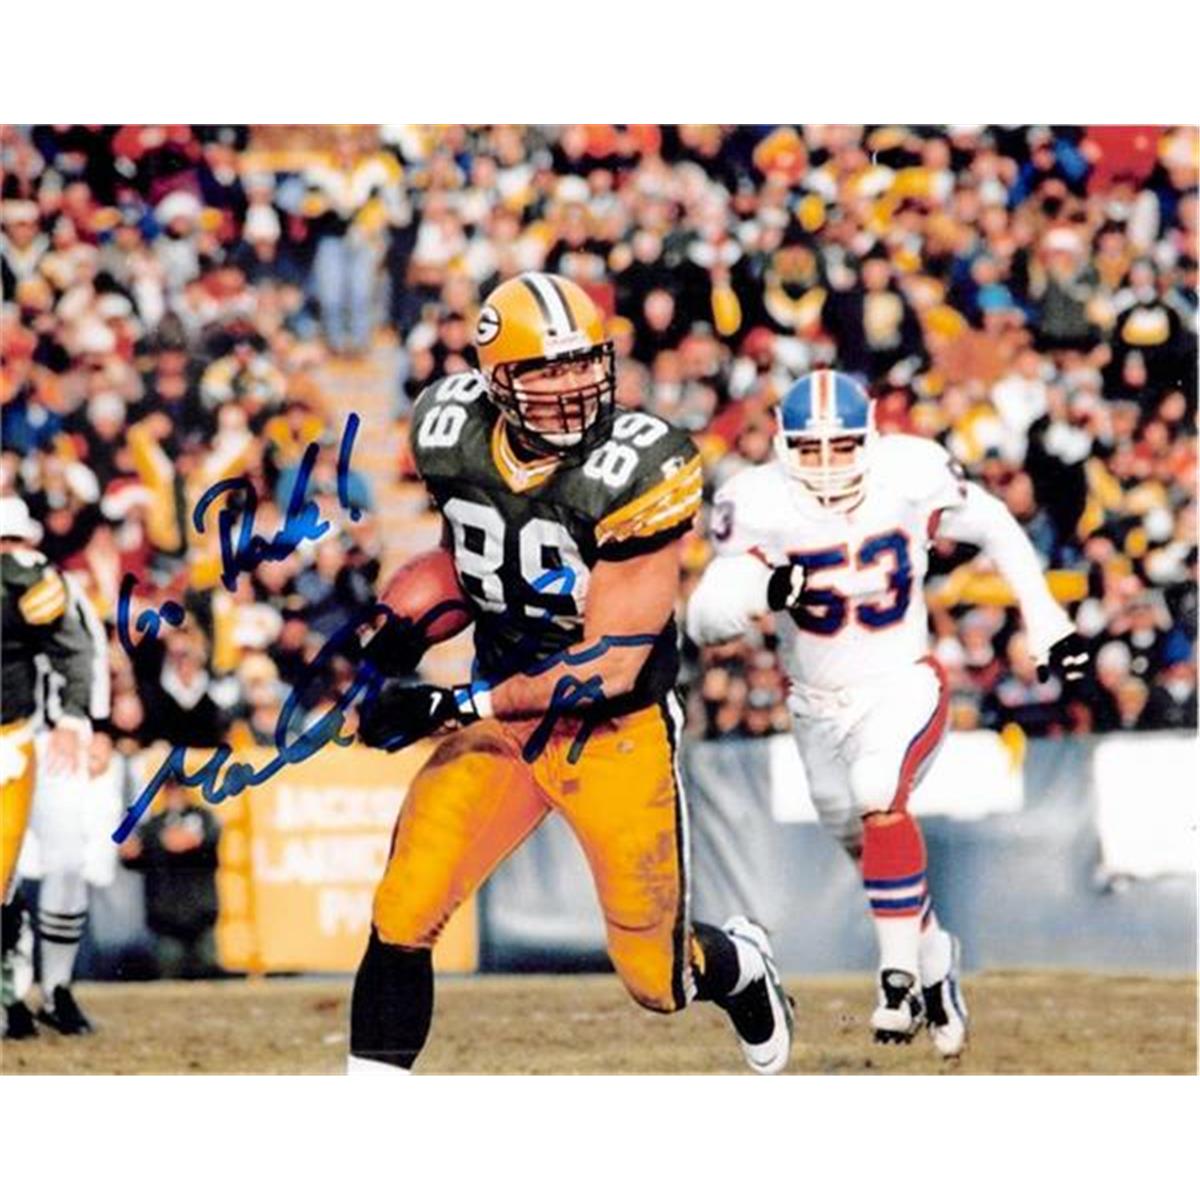 Picture of Autograph Warehouse 409326 8 x 10 in. Mark Chmura Autographed Photo - Green Bay Packers Super Bowl Champion Image No.SC2